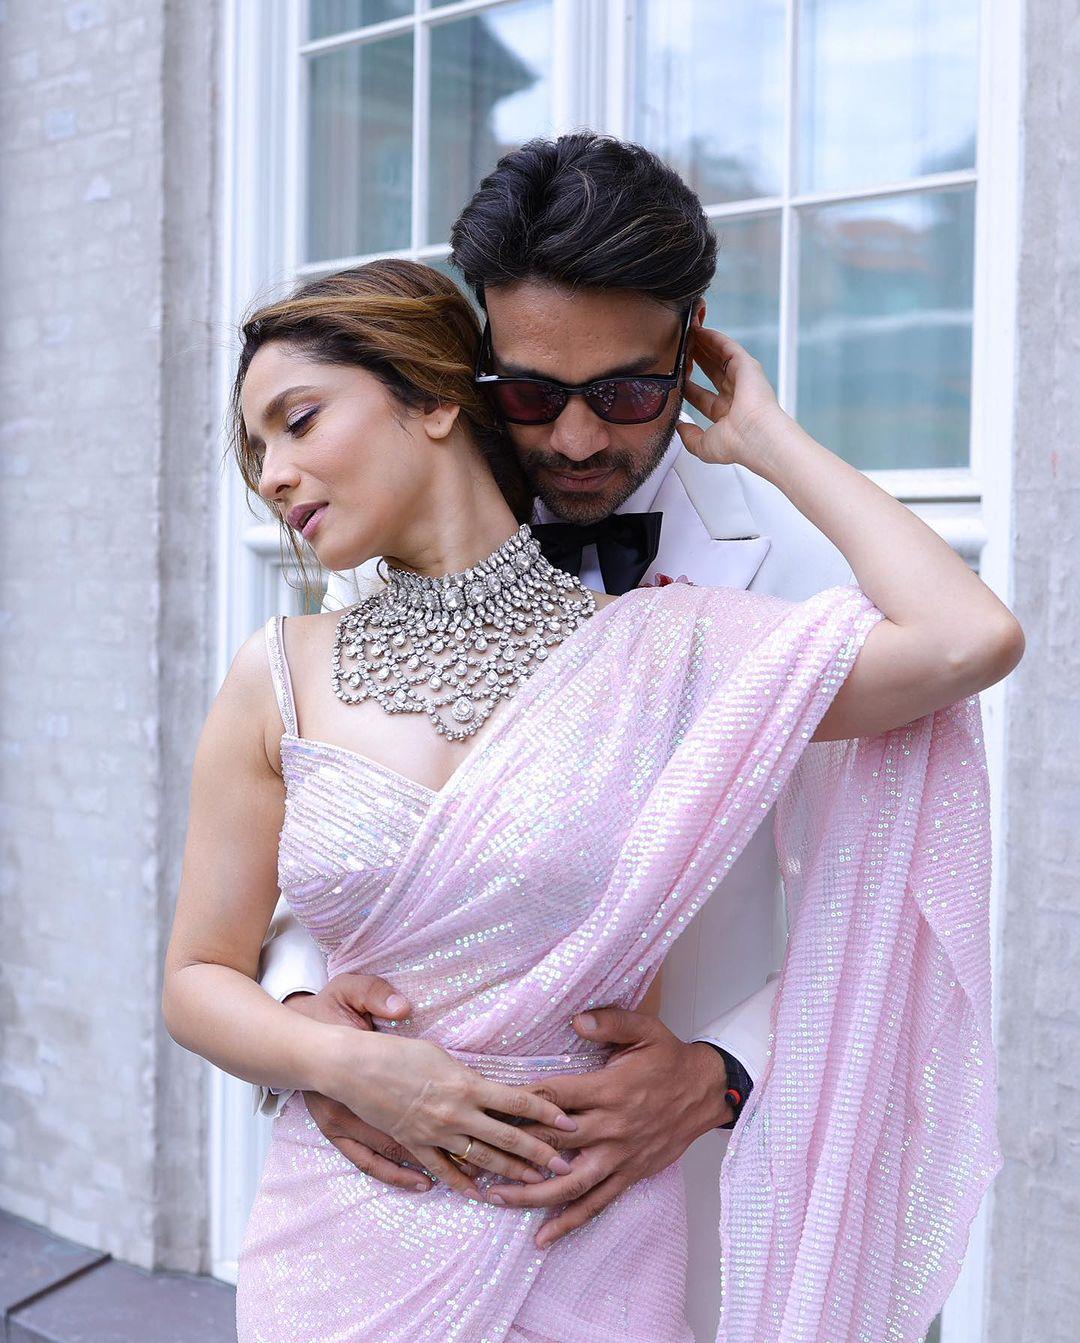 Ankita Lokhande and her husband look like the picture of 'couple goals' in this aww-inspiring photo!